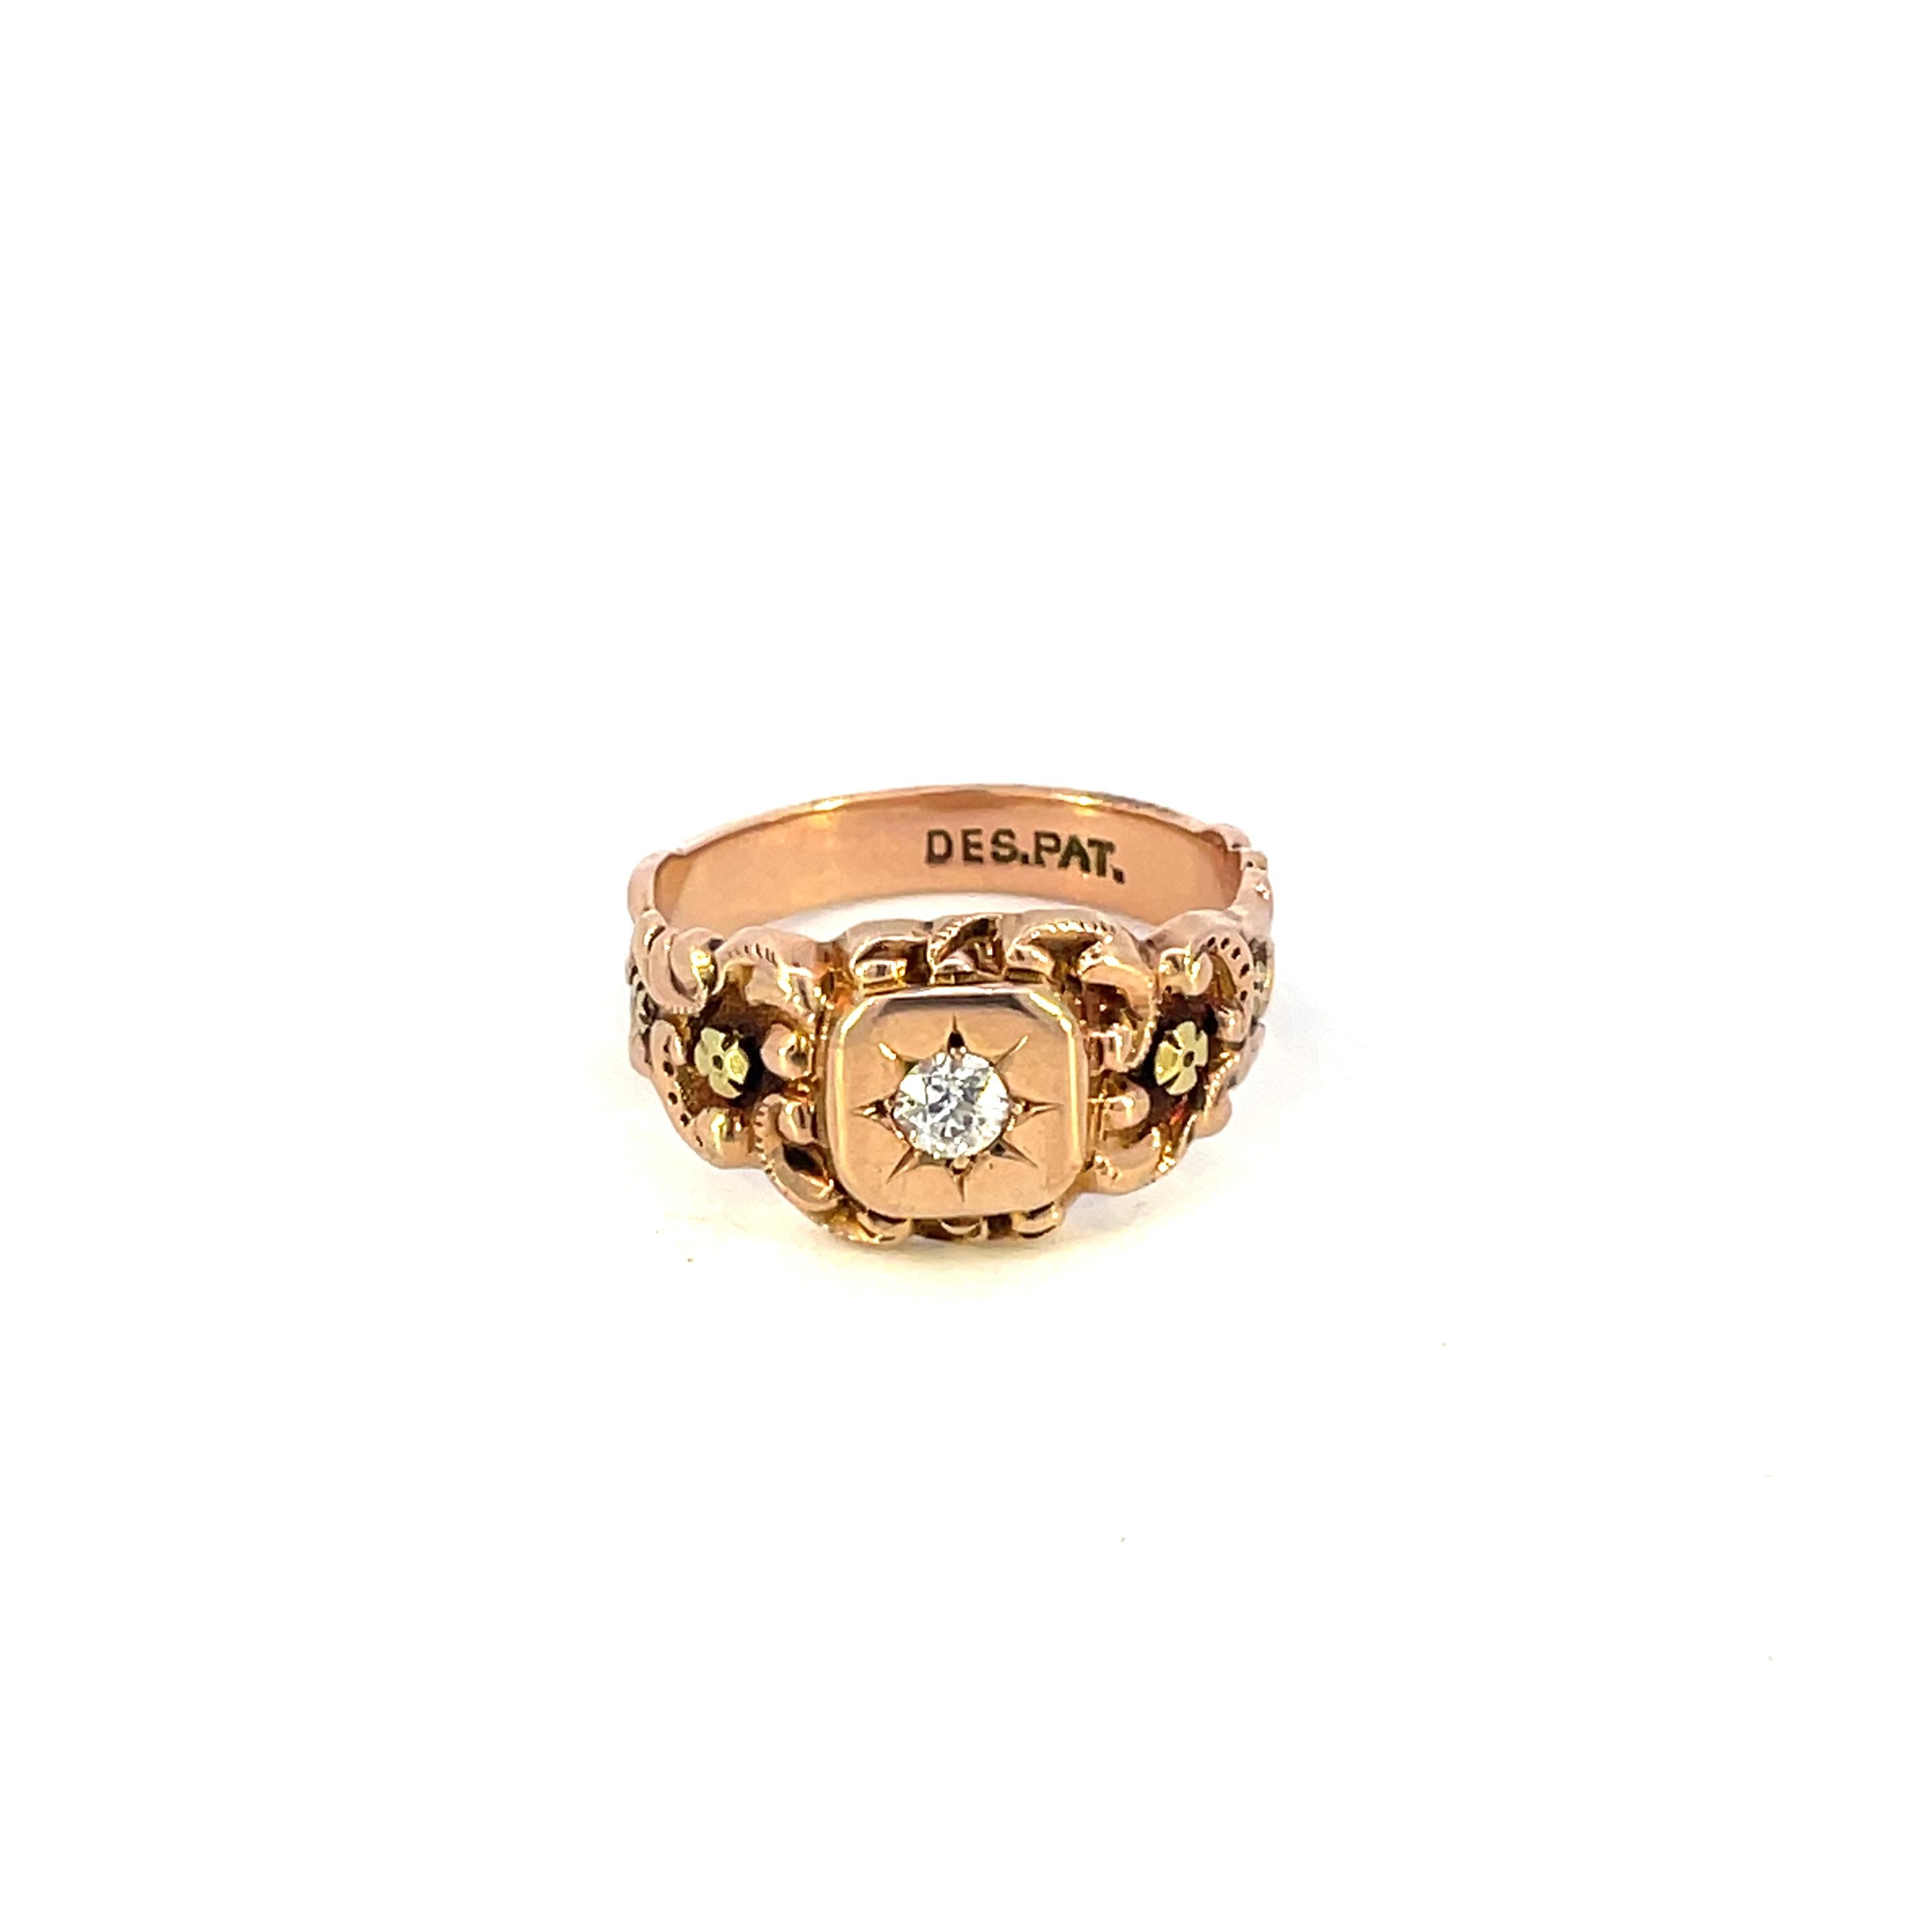 Women's 1880 14K Rose Gold Victorian Ring & Applied Green Gold Florets with Euro Cut DIA For Sale